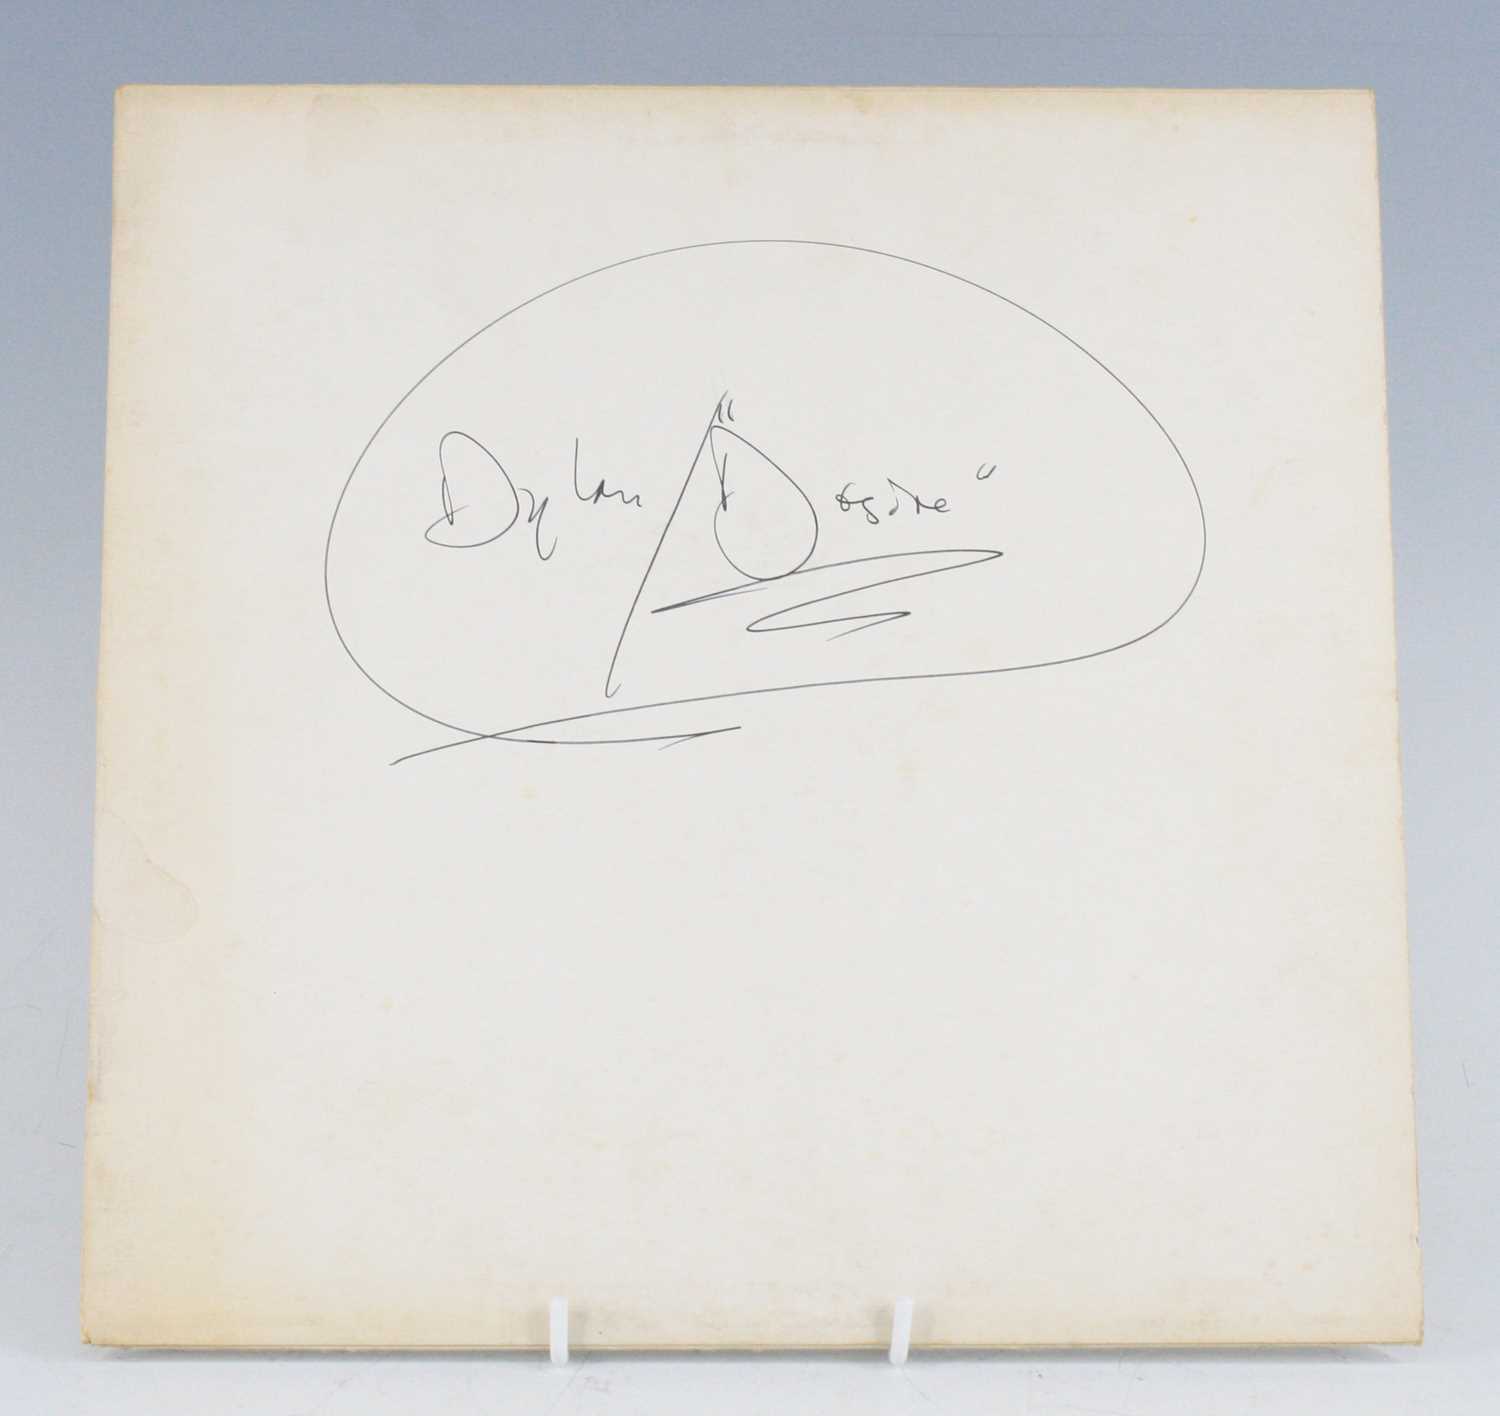 Lot 1018 - Bob Dylan, Desire, White label with hand...